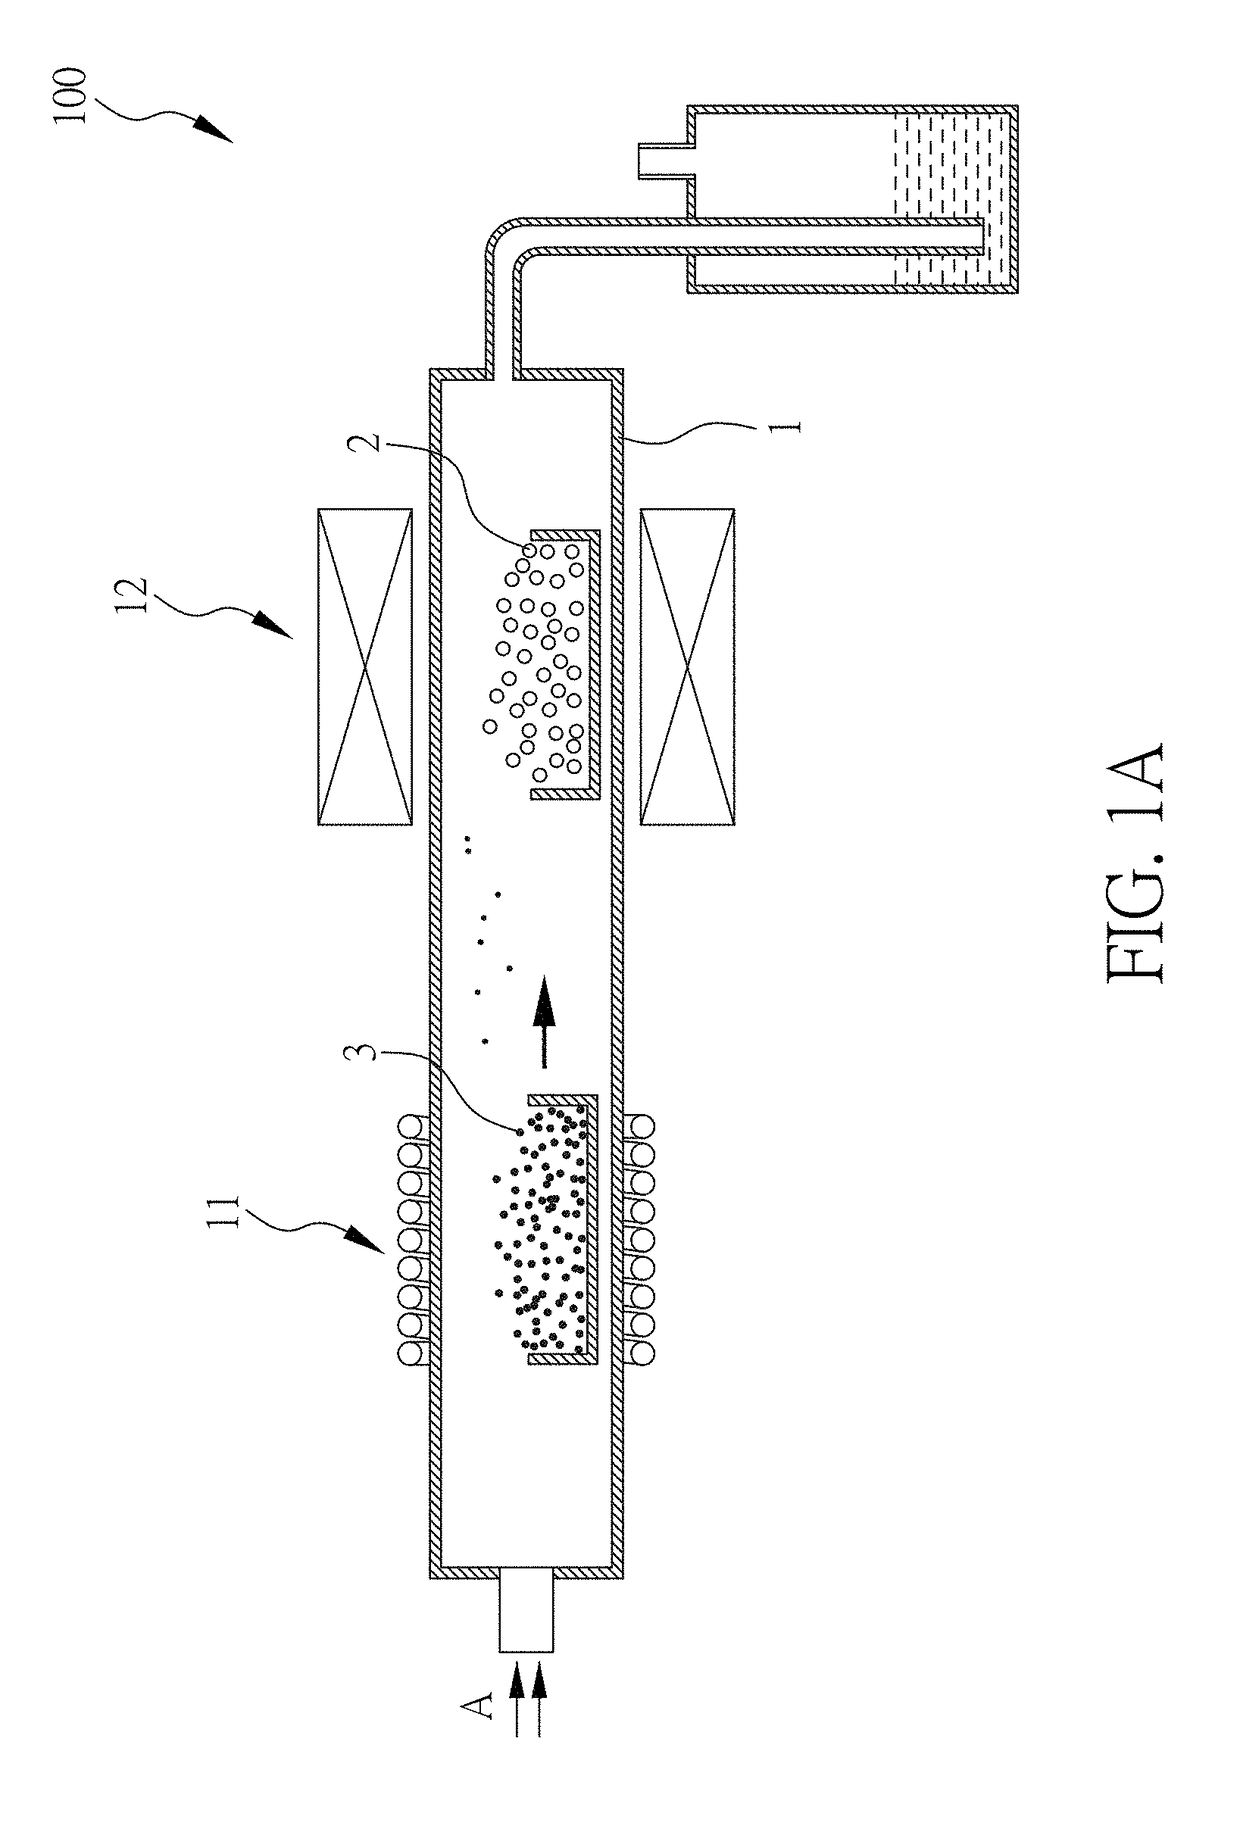 Composite electrode material and method for manufacturing the same